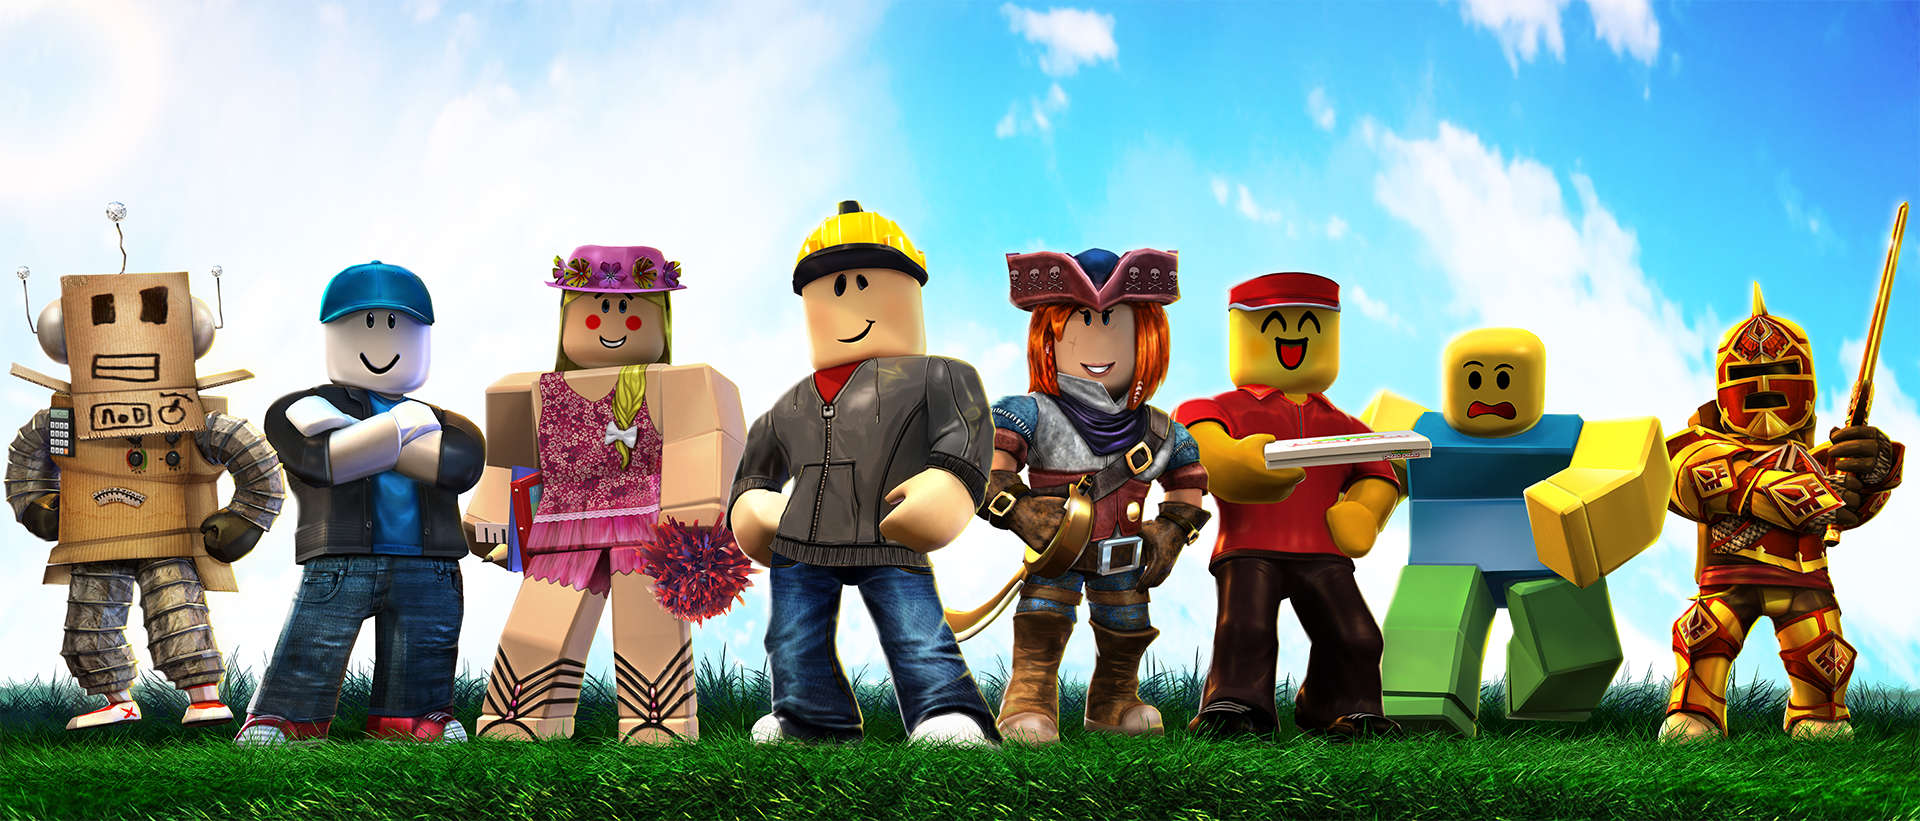 Roblox Raises 150 Million In Funding Is Now Reportedly Worth 2 5 Billion - most robux 17m roblox